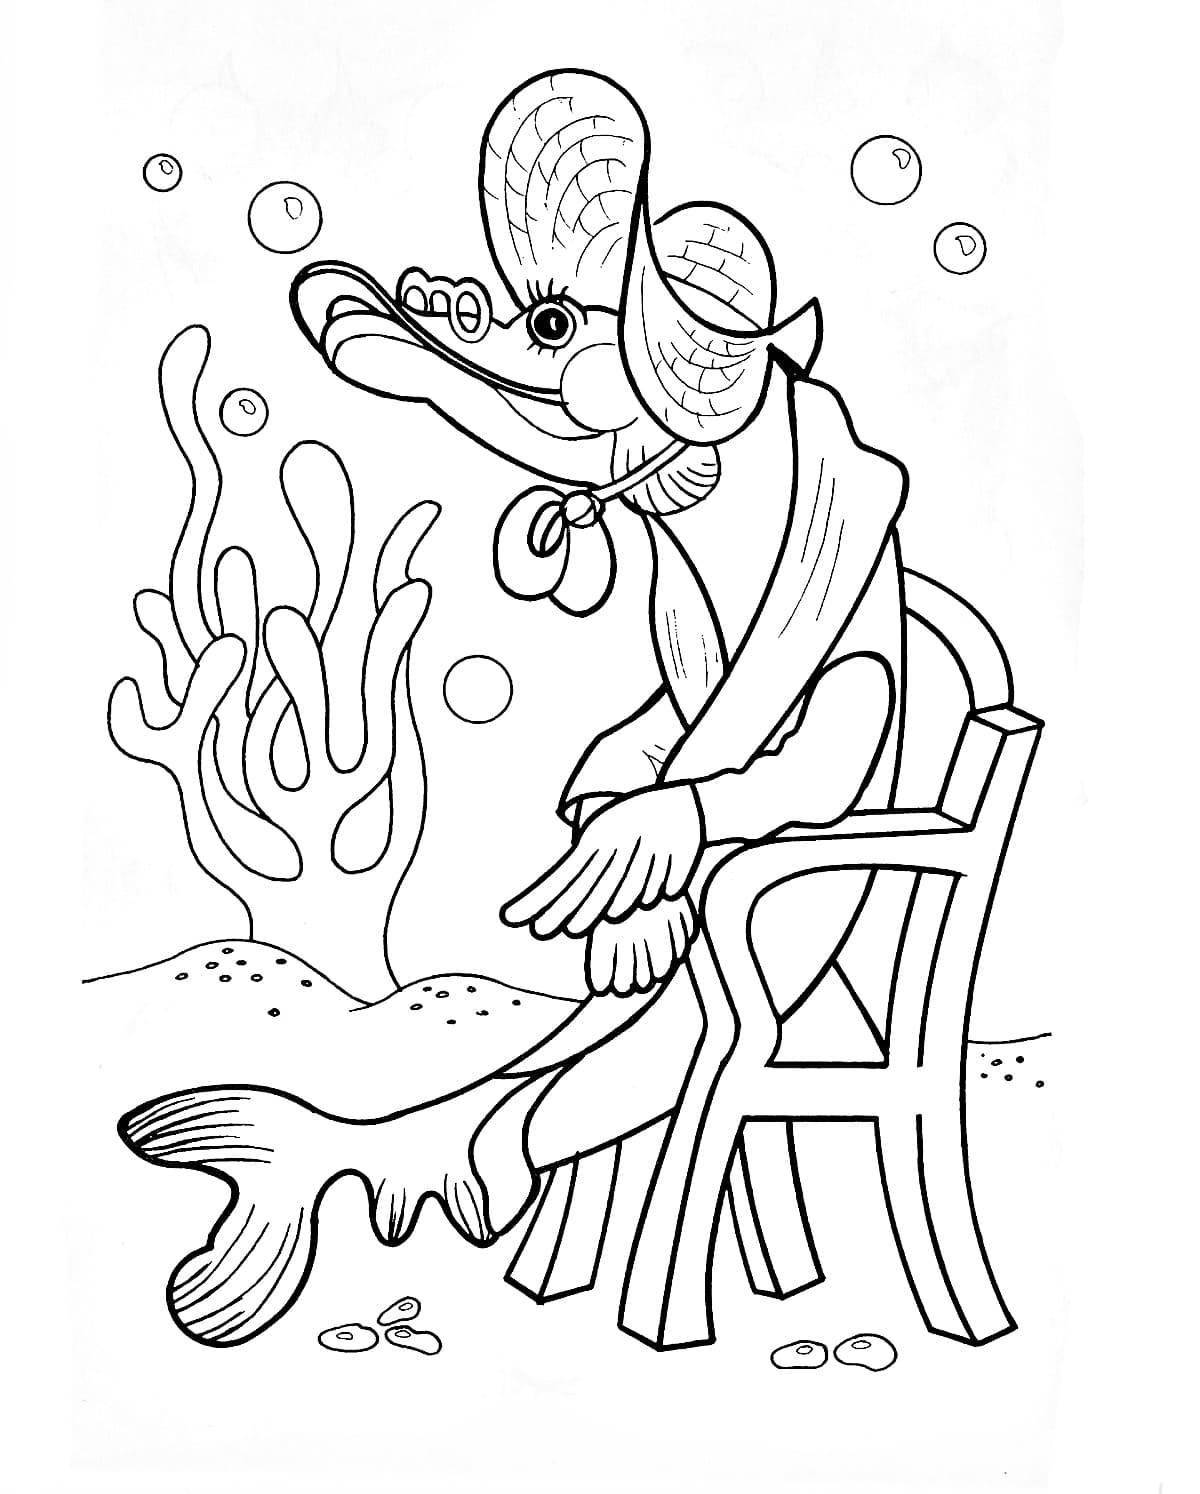 Coloring page happy pike for preschoolers